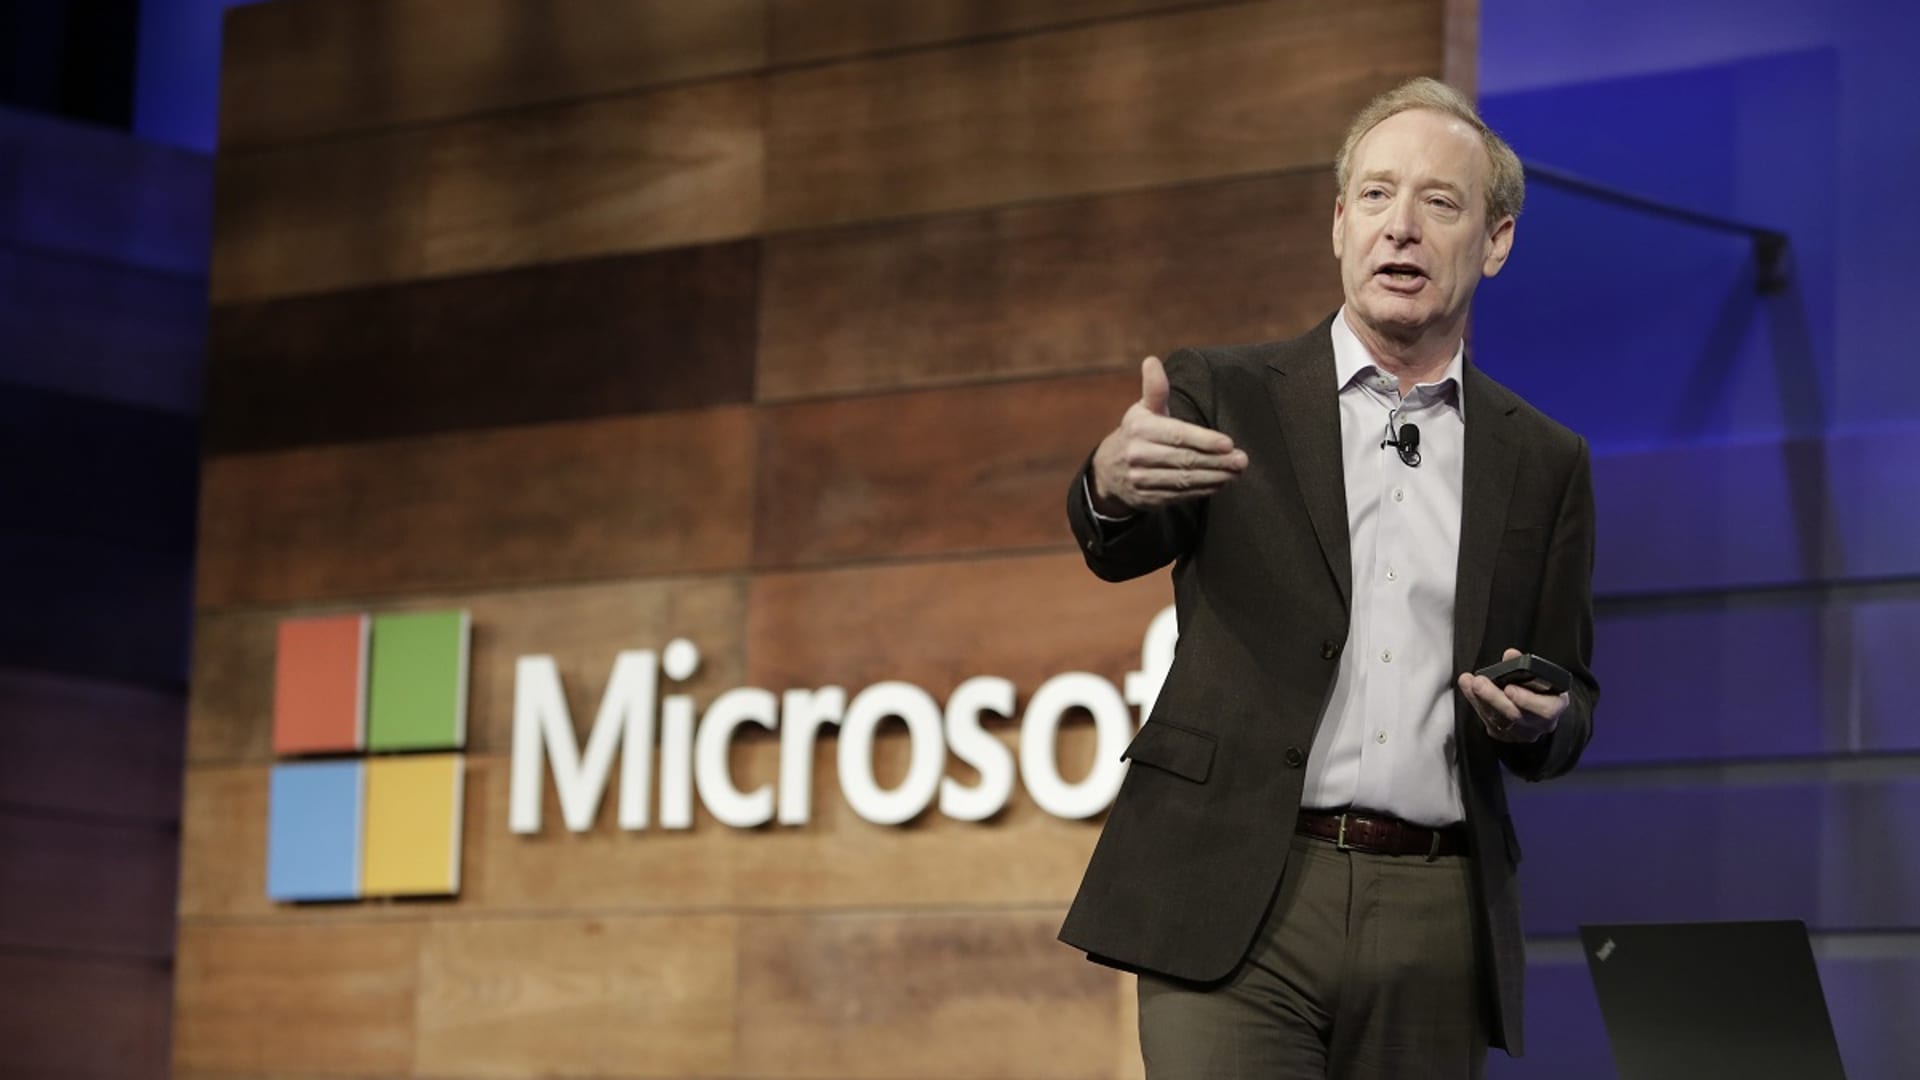 Microsoft could move some jobs abroad because of US immigration policies, top exec says